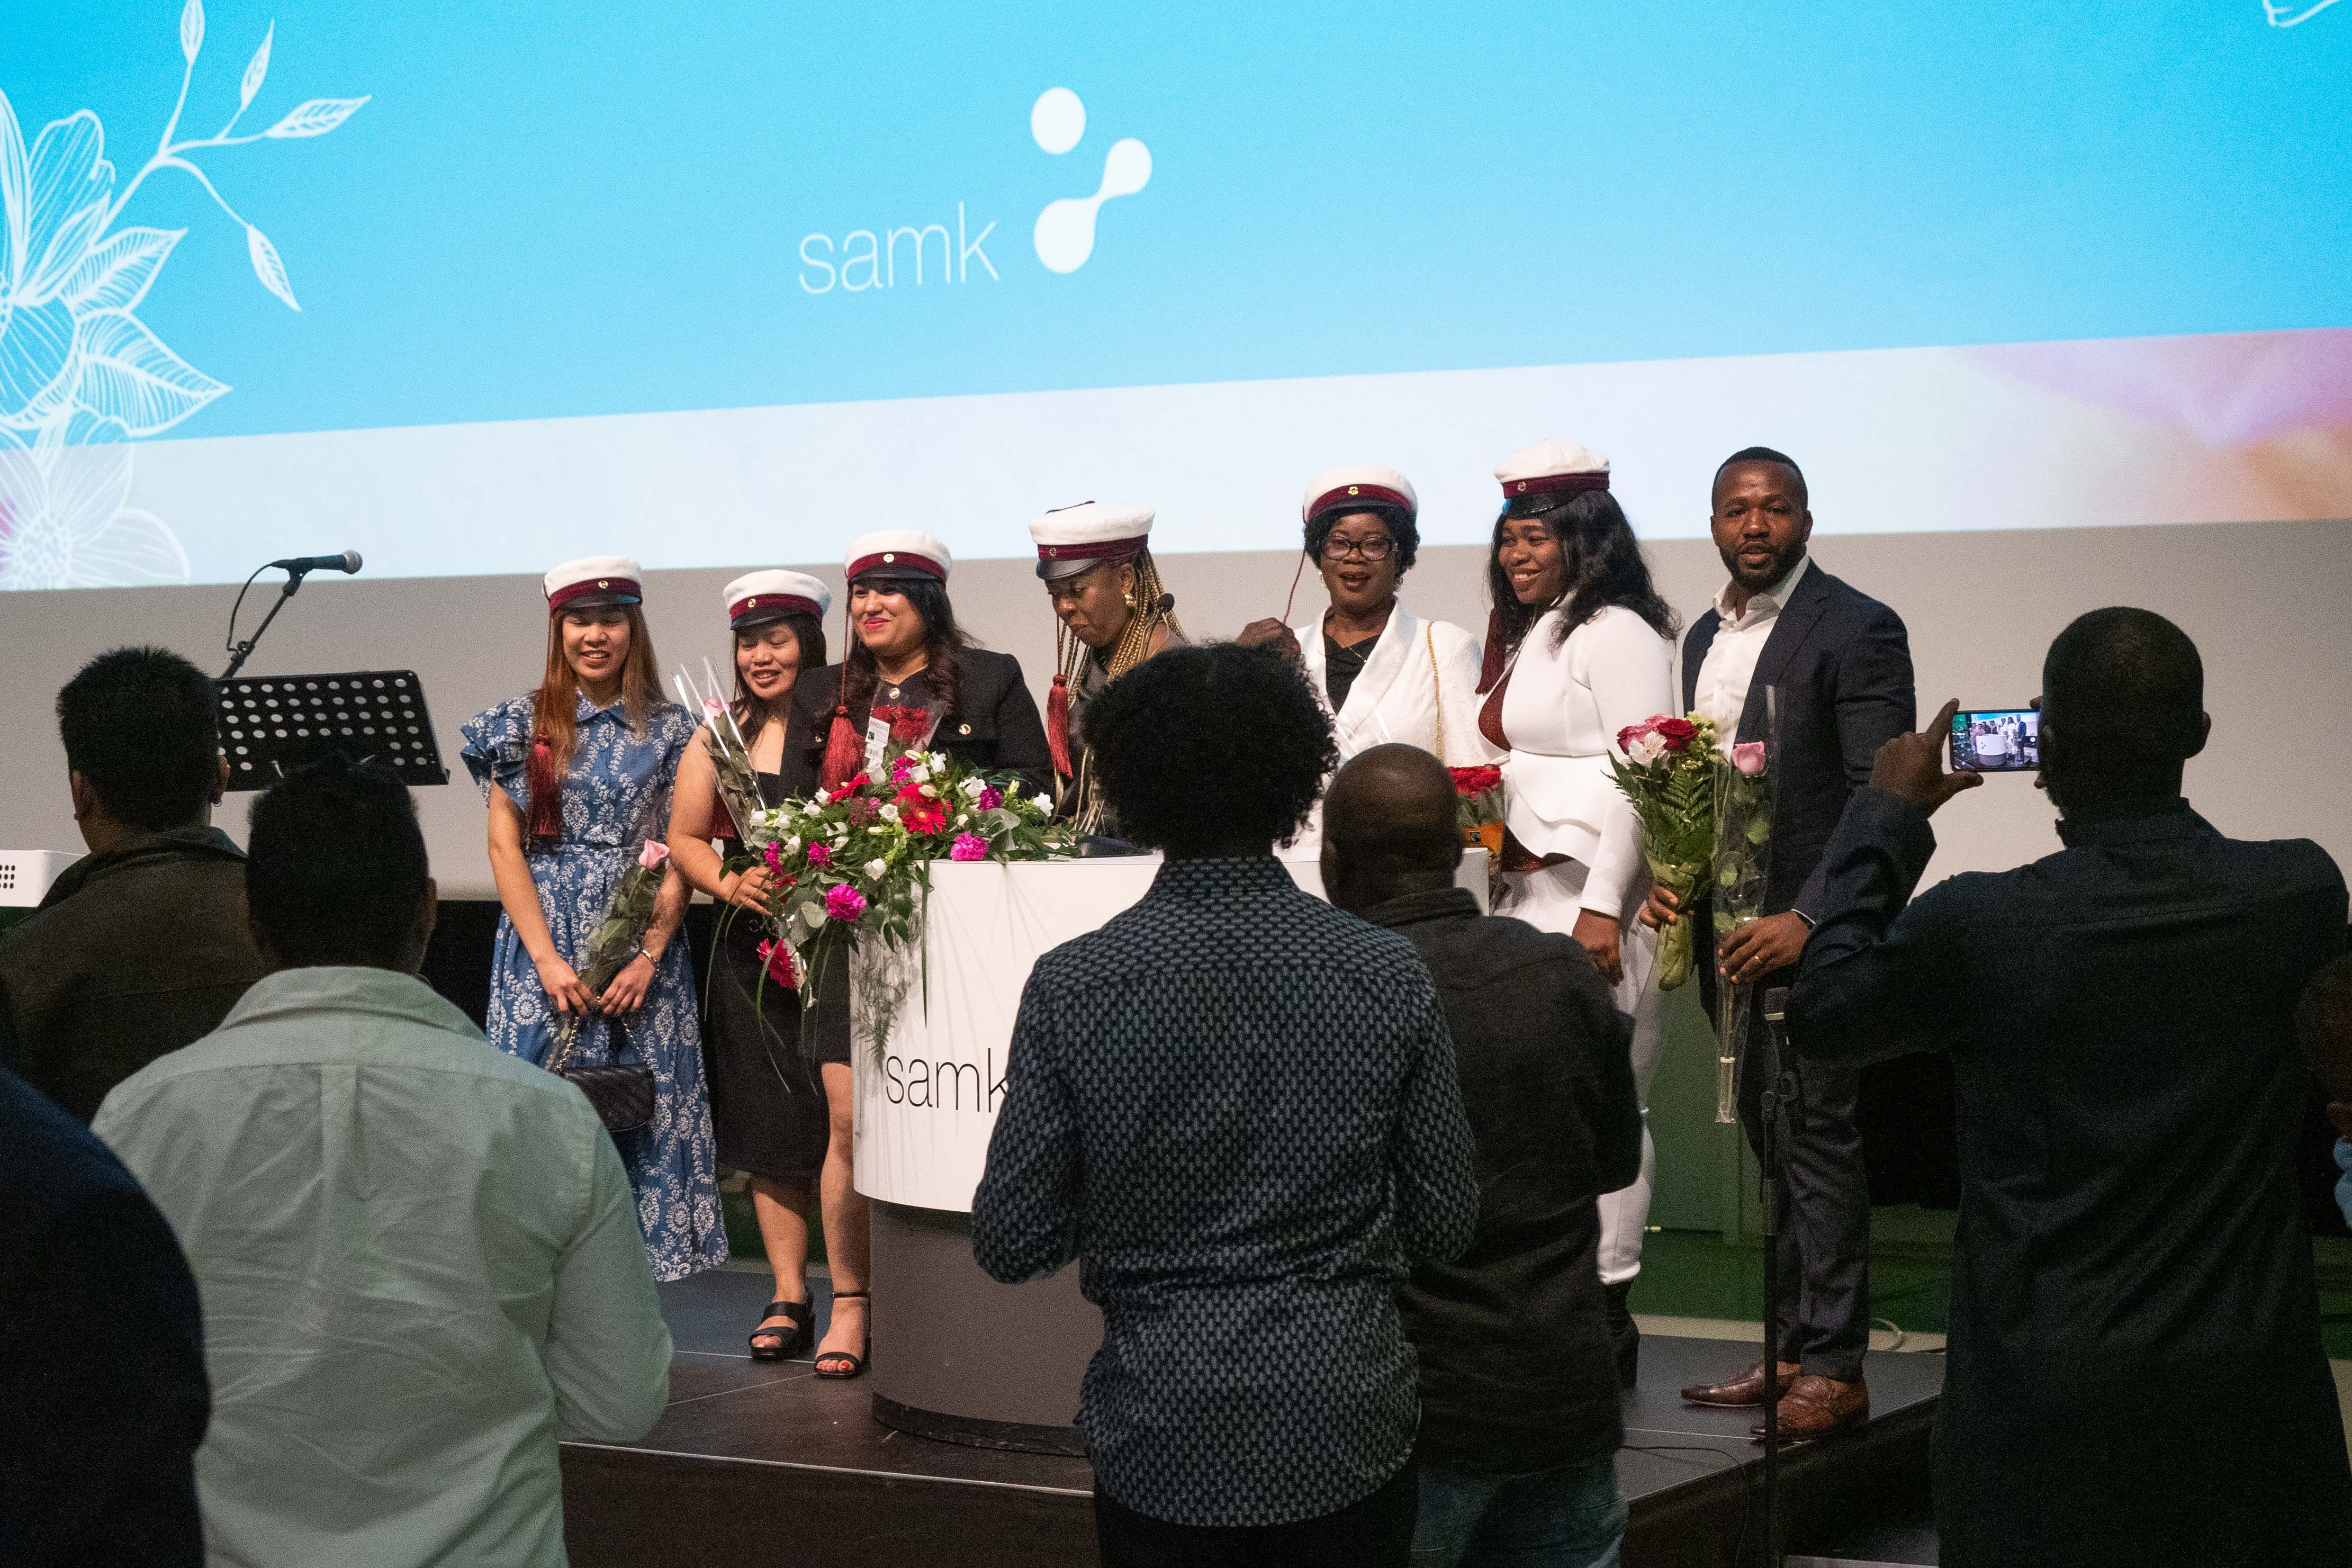 A group of graduates standing on stage and being photographed.